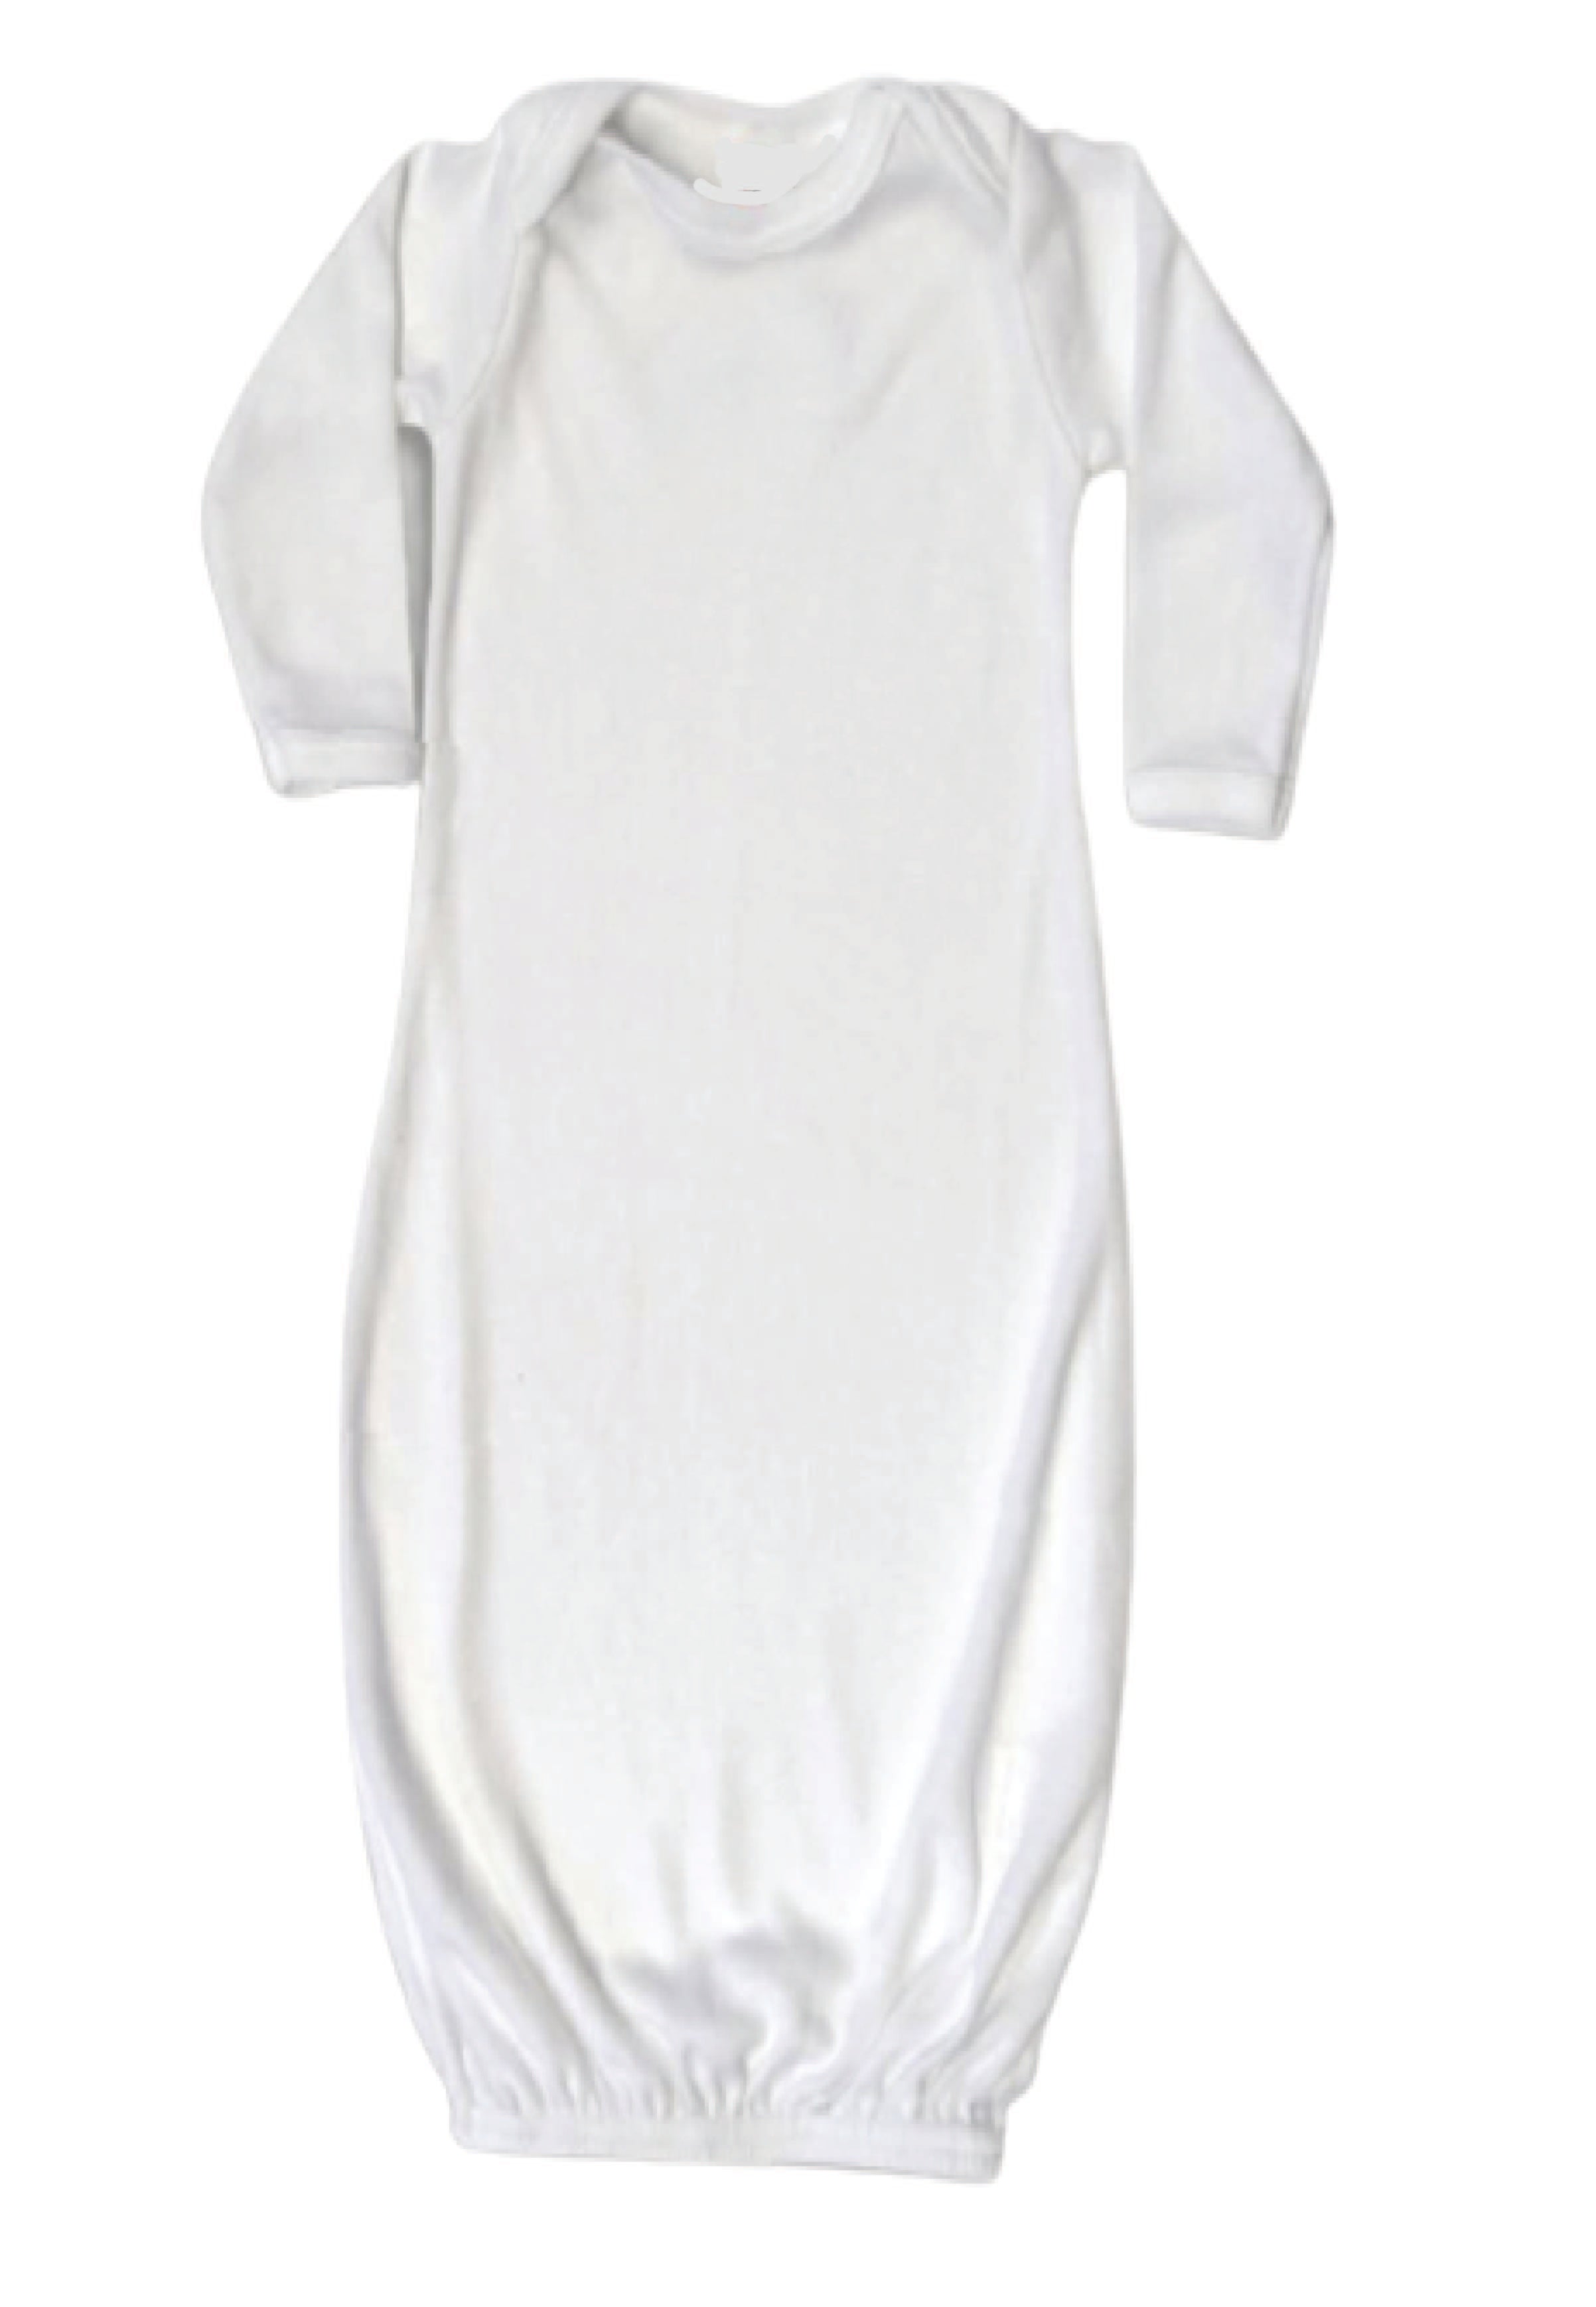 Sublimation Baby Gown, 100% Polyester, White